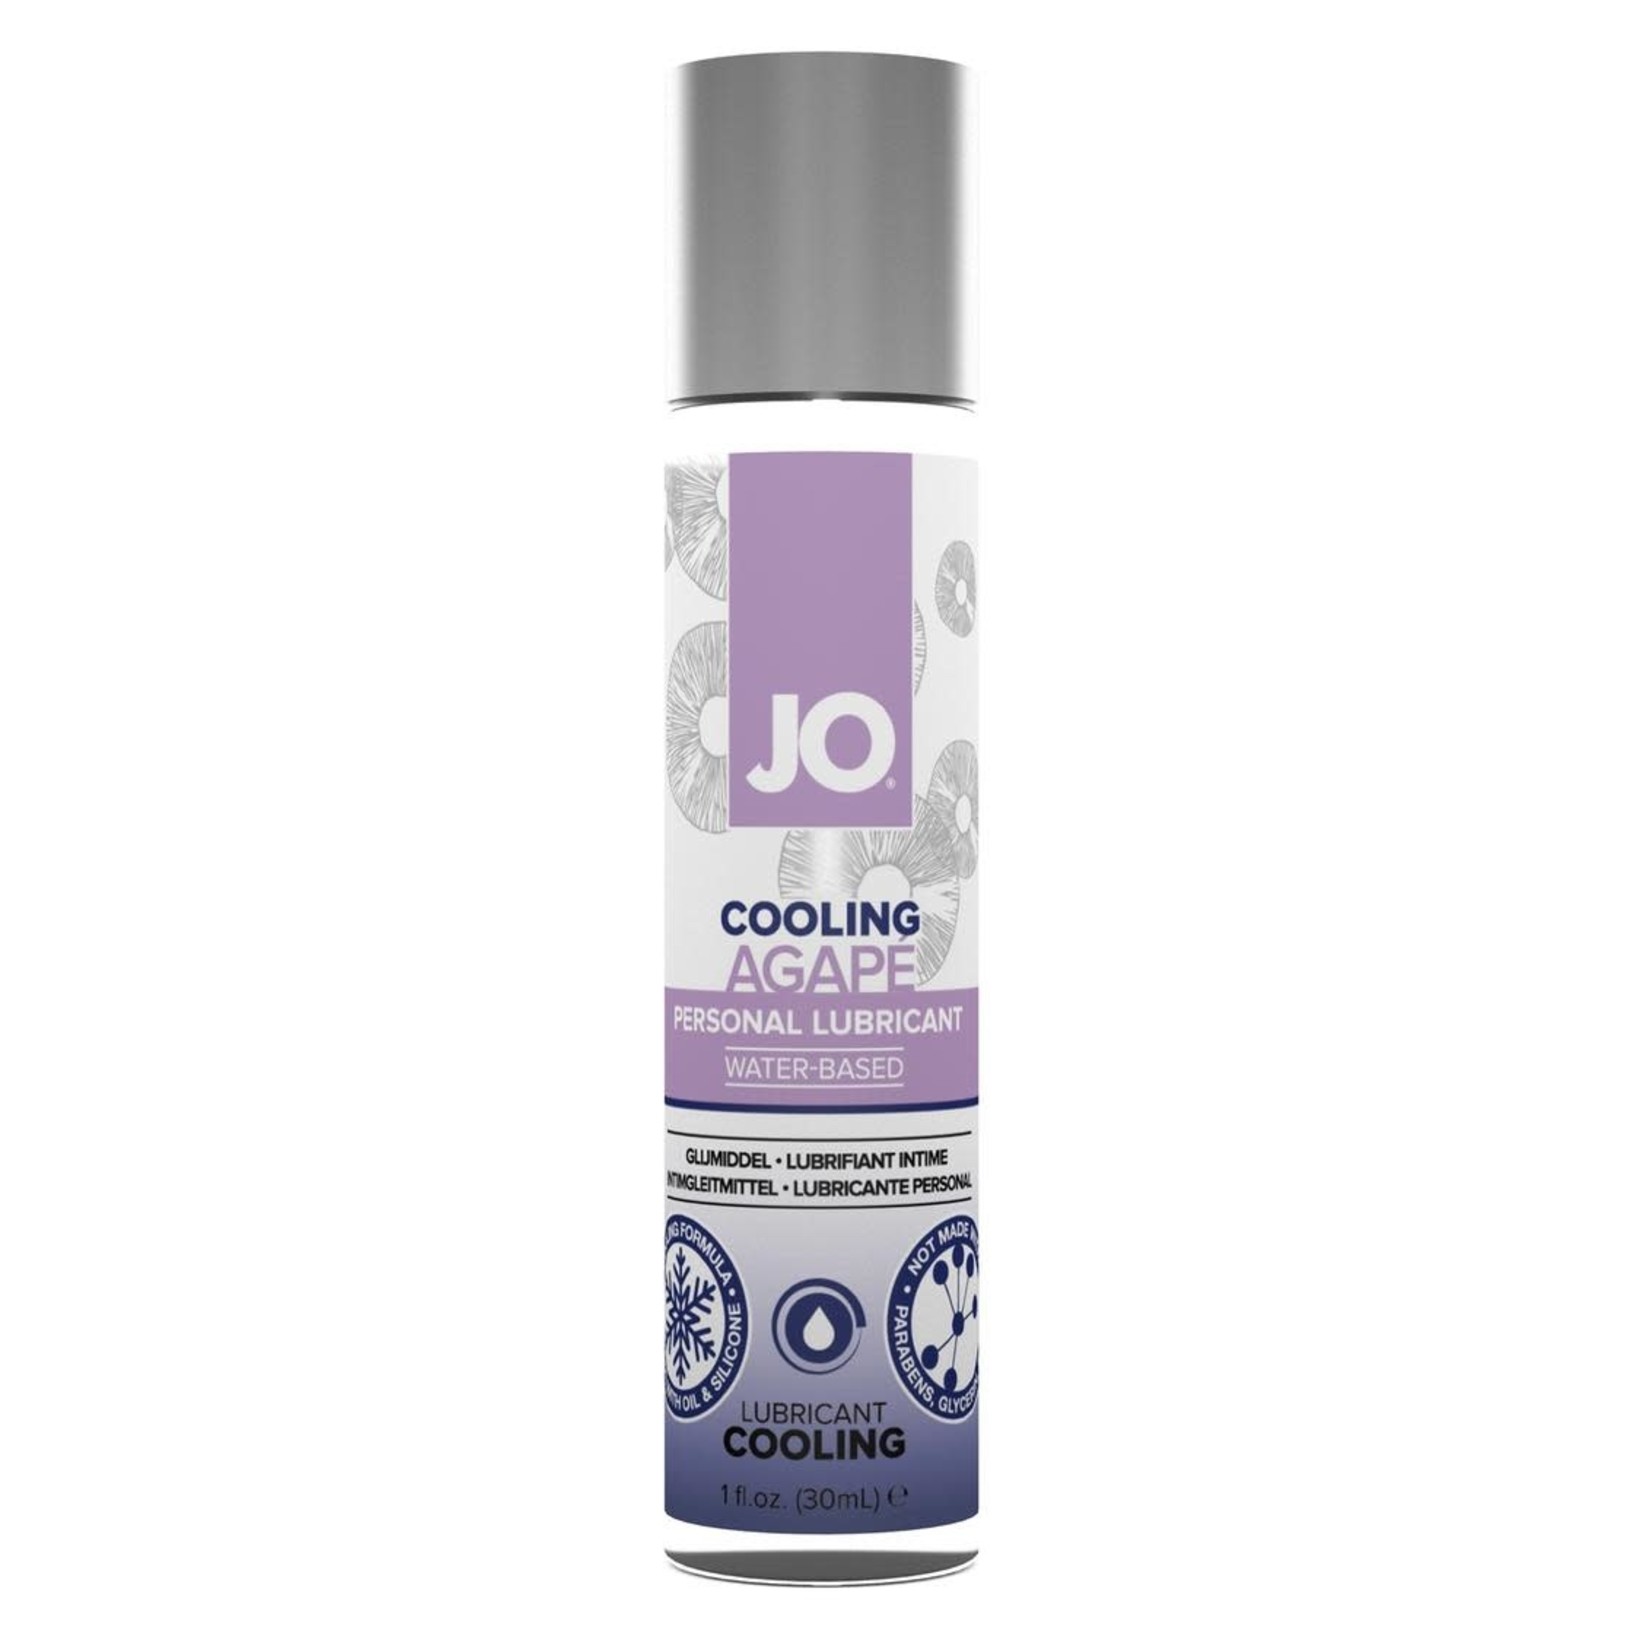 Jo Agape Cooling Personal Lubricant 1 Ounce